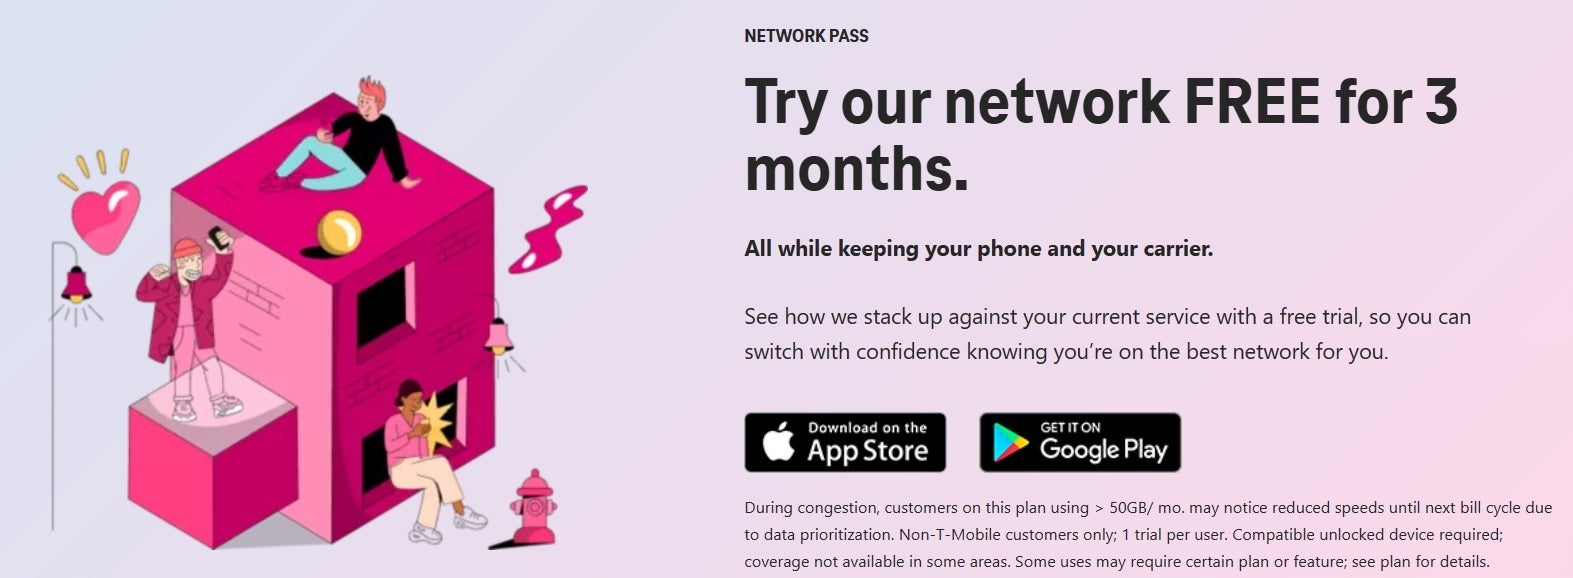 T-Mobile's Network Pass gives you up to three free months of unlimited data to try - Various wireless firms including Cricket, Visible, Verizon and T-Mobile offer free trials